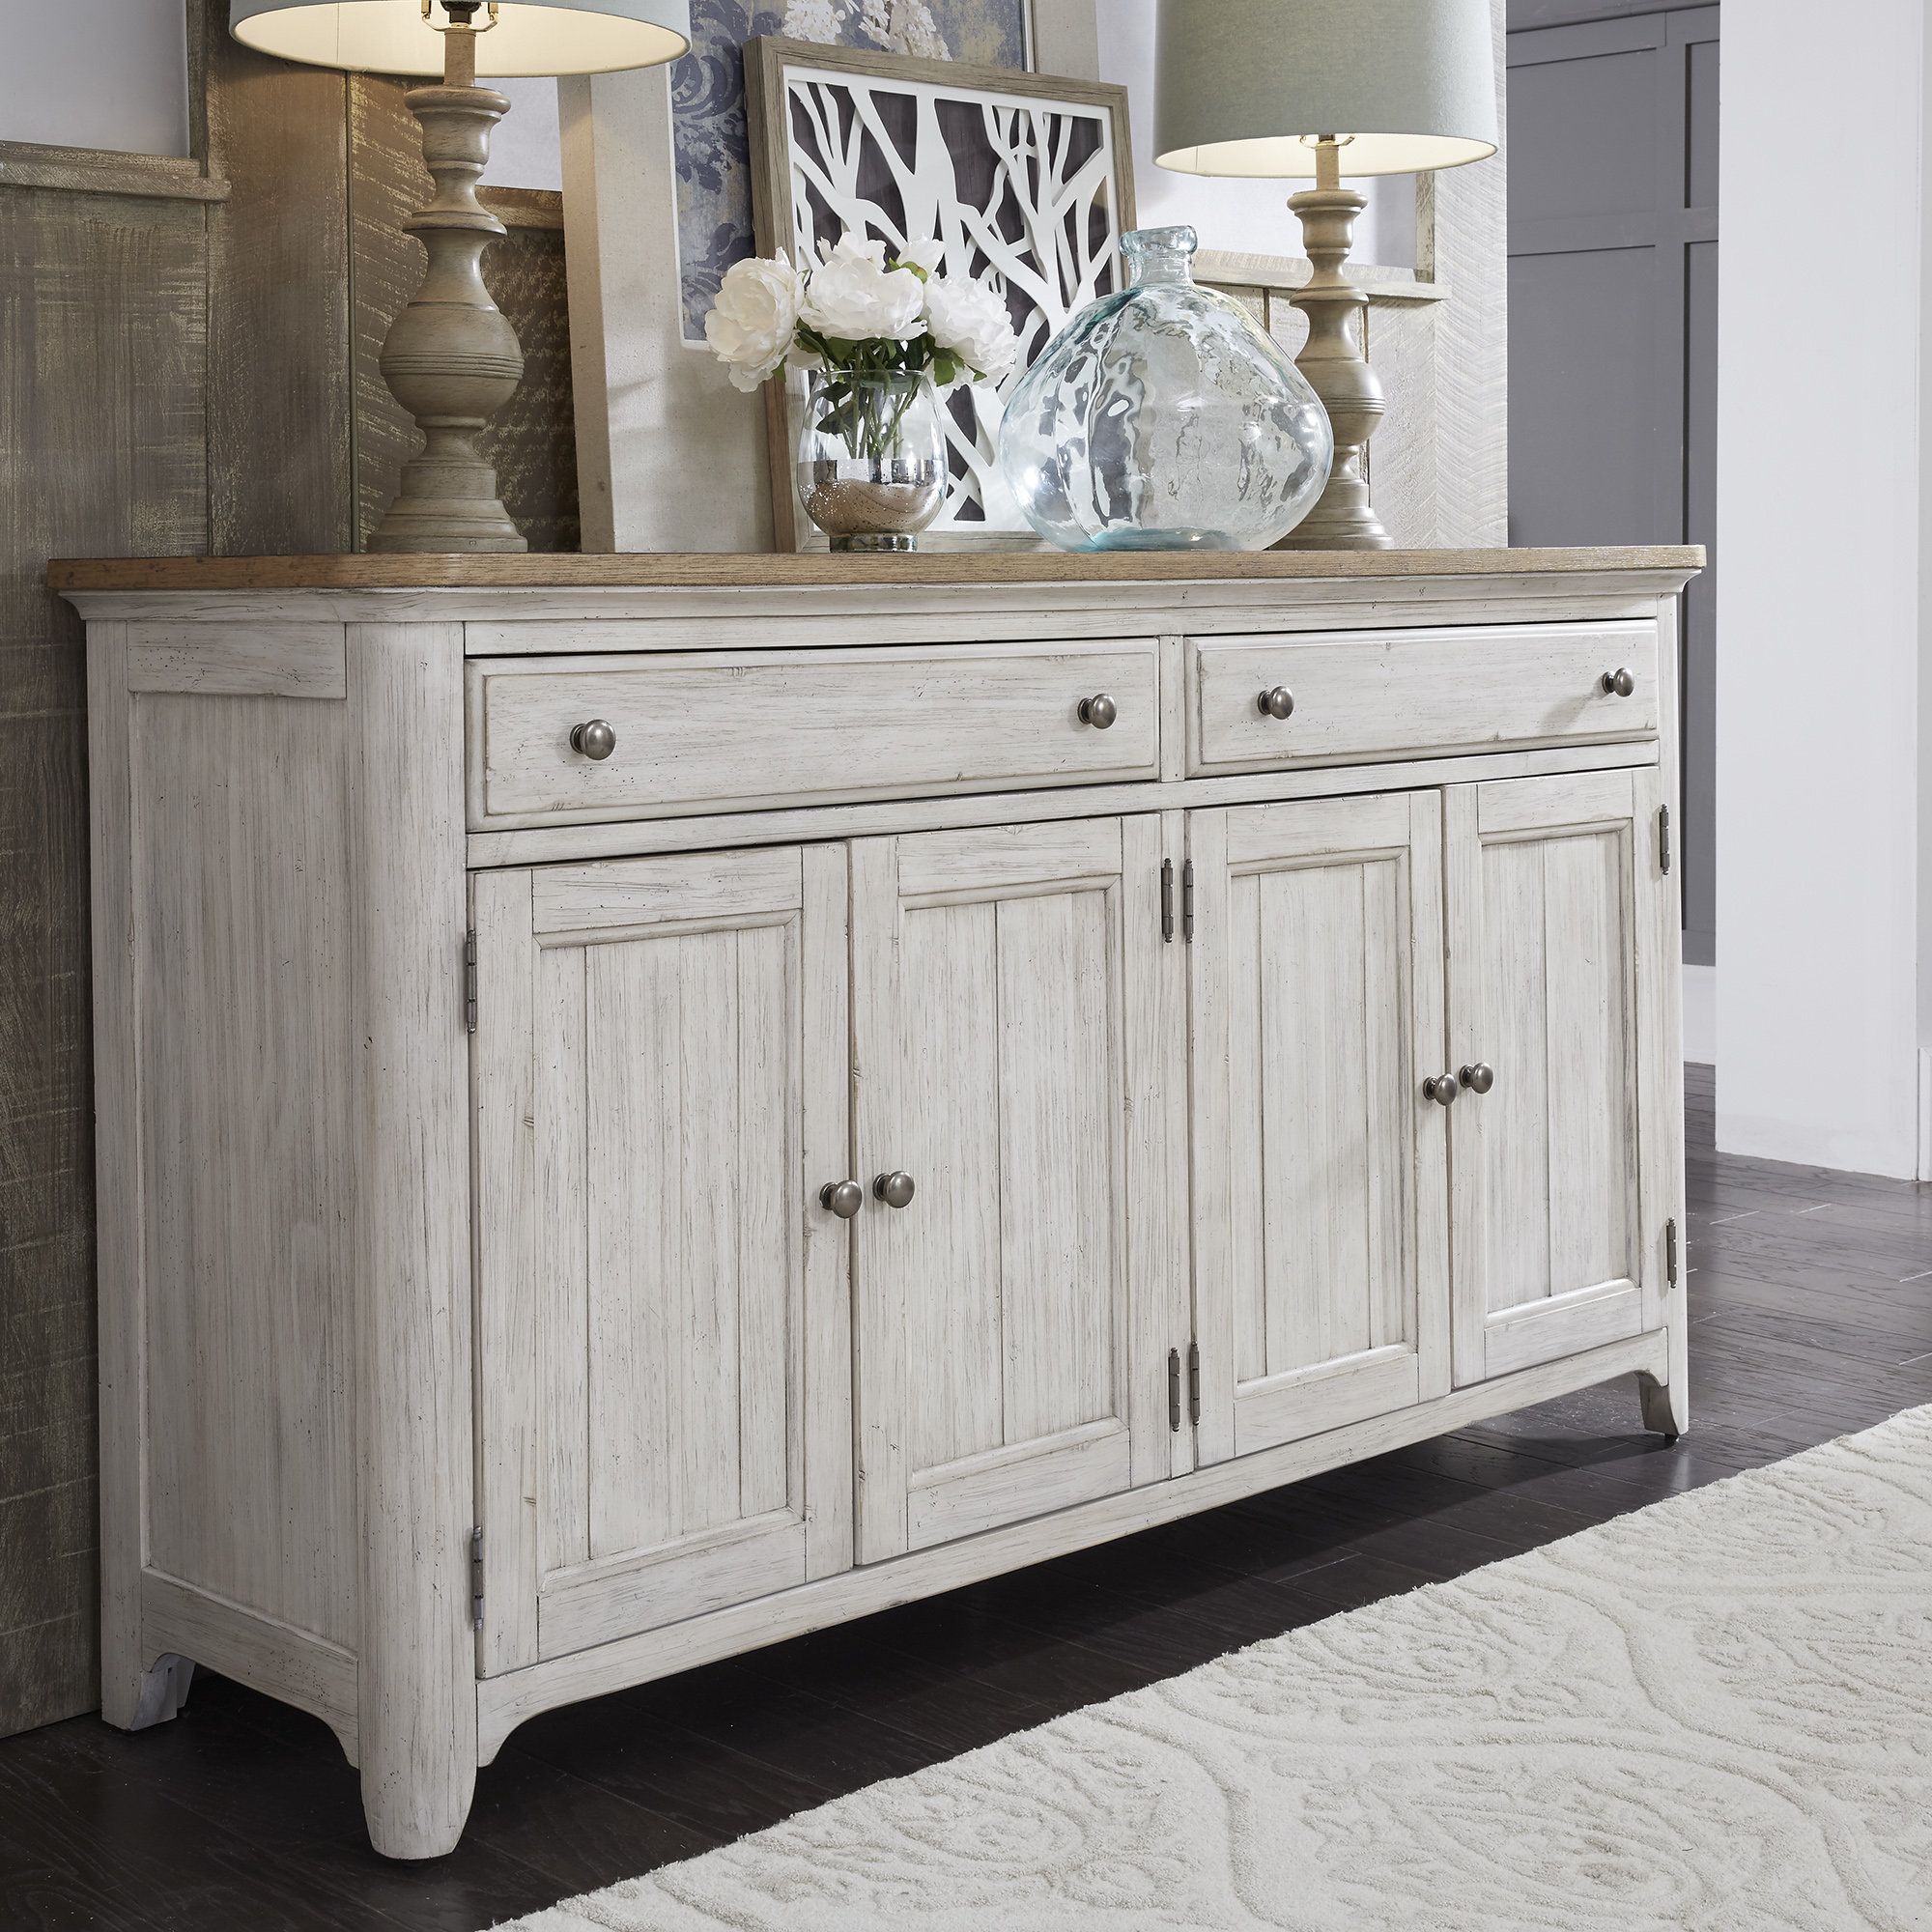 Farmhouse & Rustic Silverware Storage Equipped Sideboards Throughout Payton Serving Sideboards (View 5 of 30)